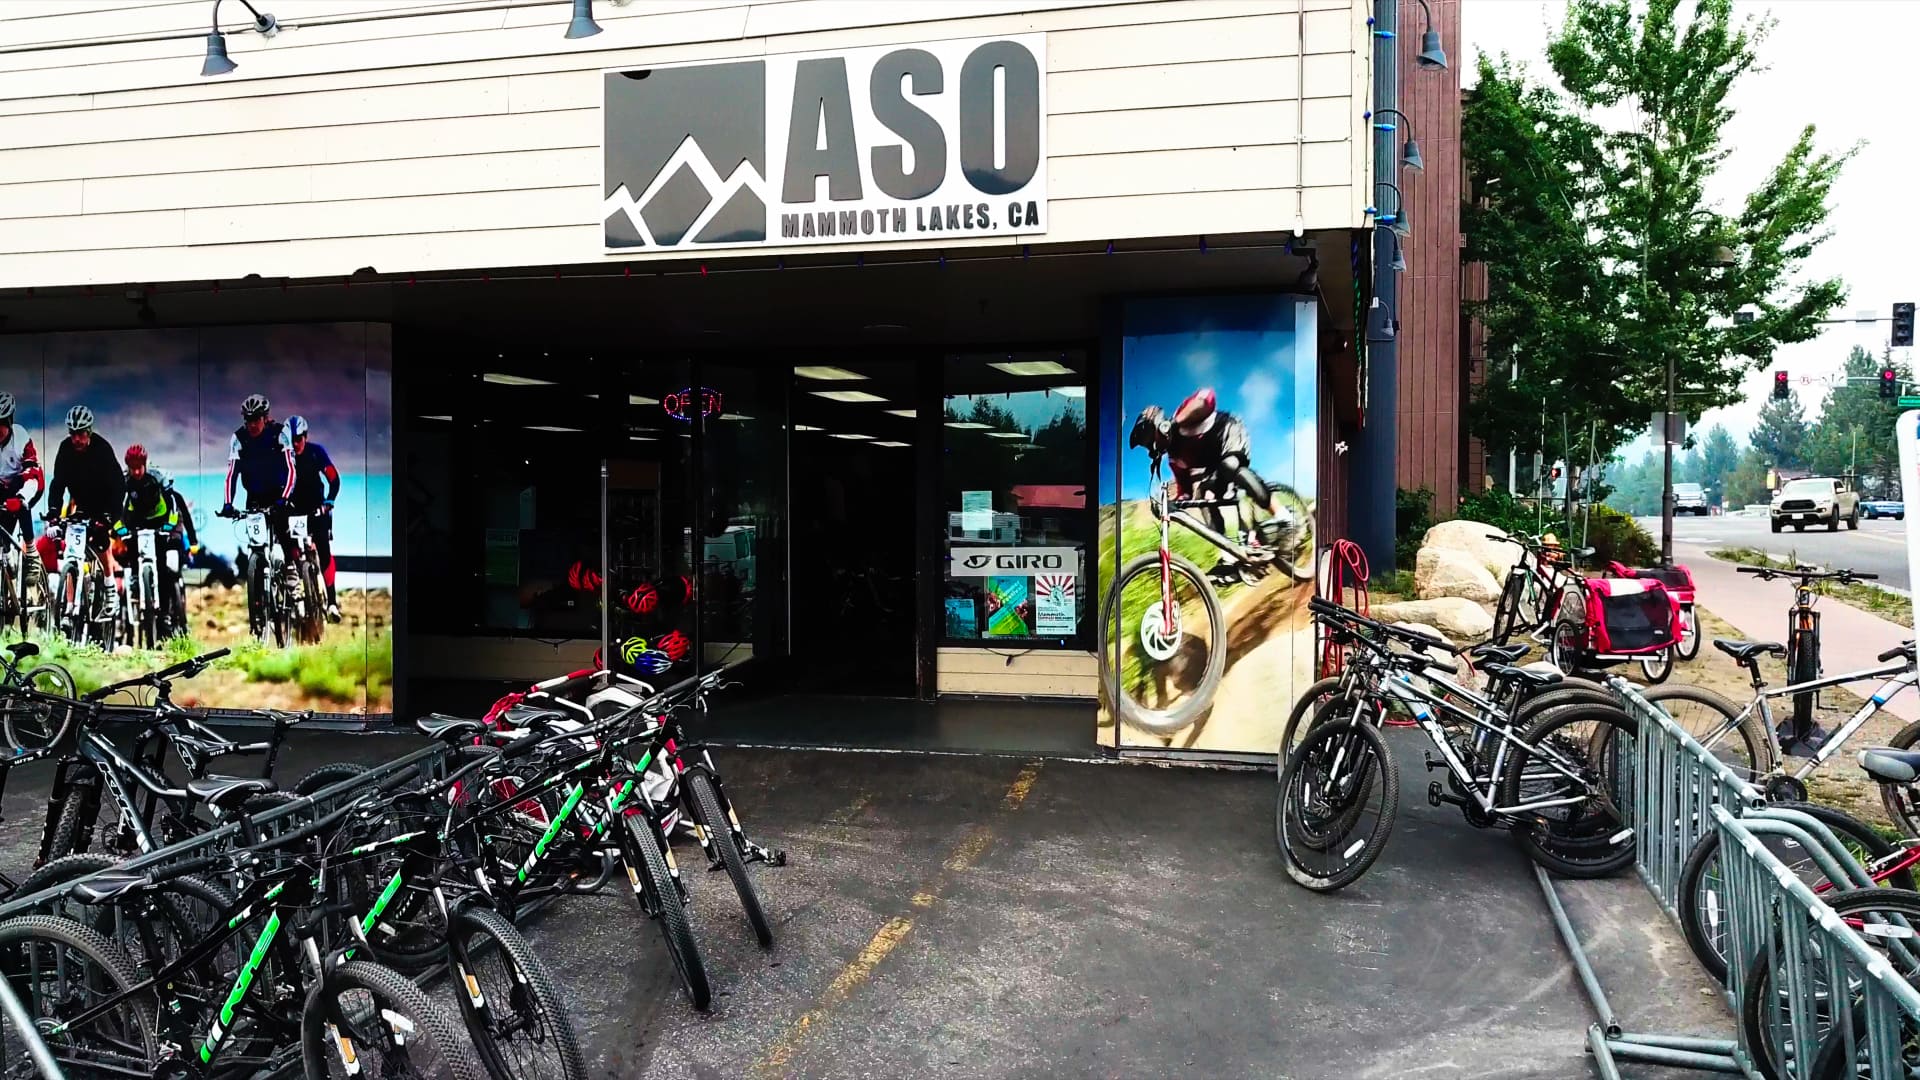 ASO - Adventure Sports Outpost - Mammoth Lakes, CA, US, bike rentals
